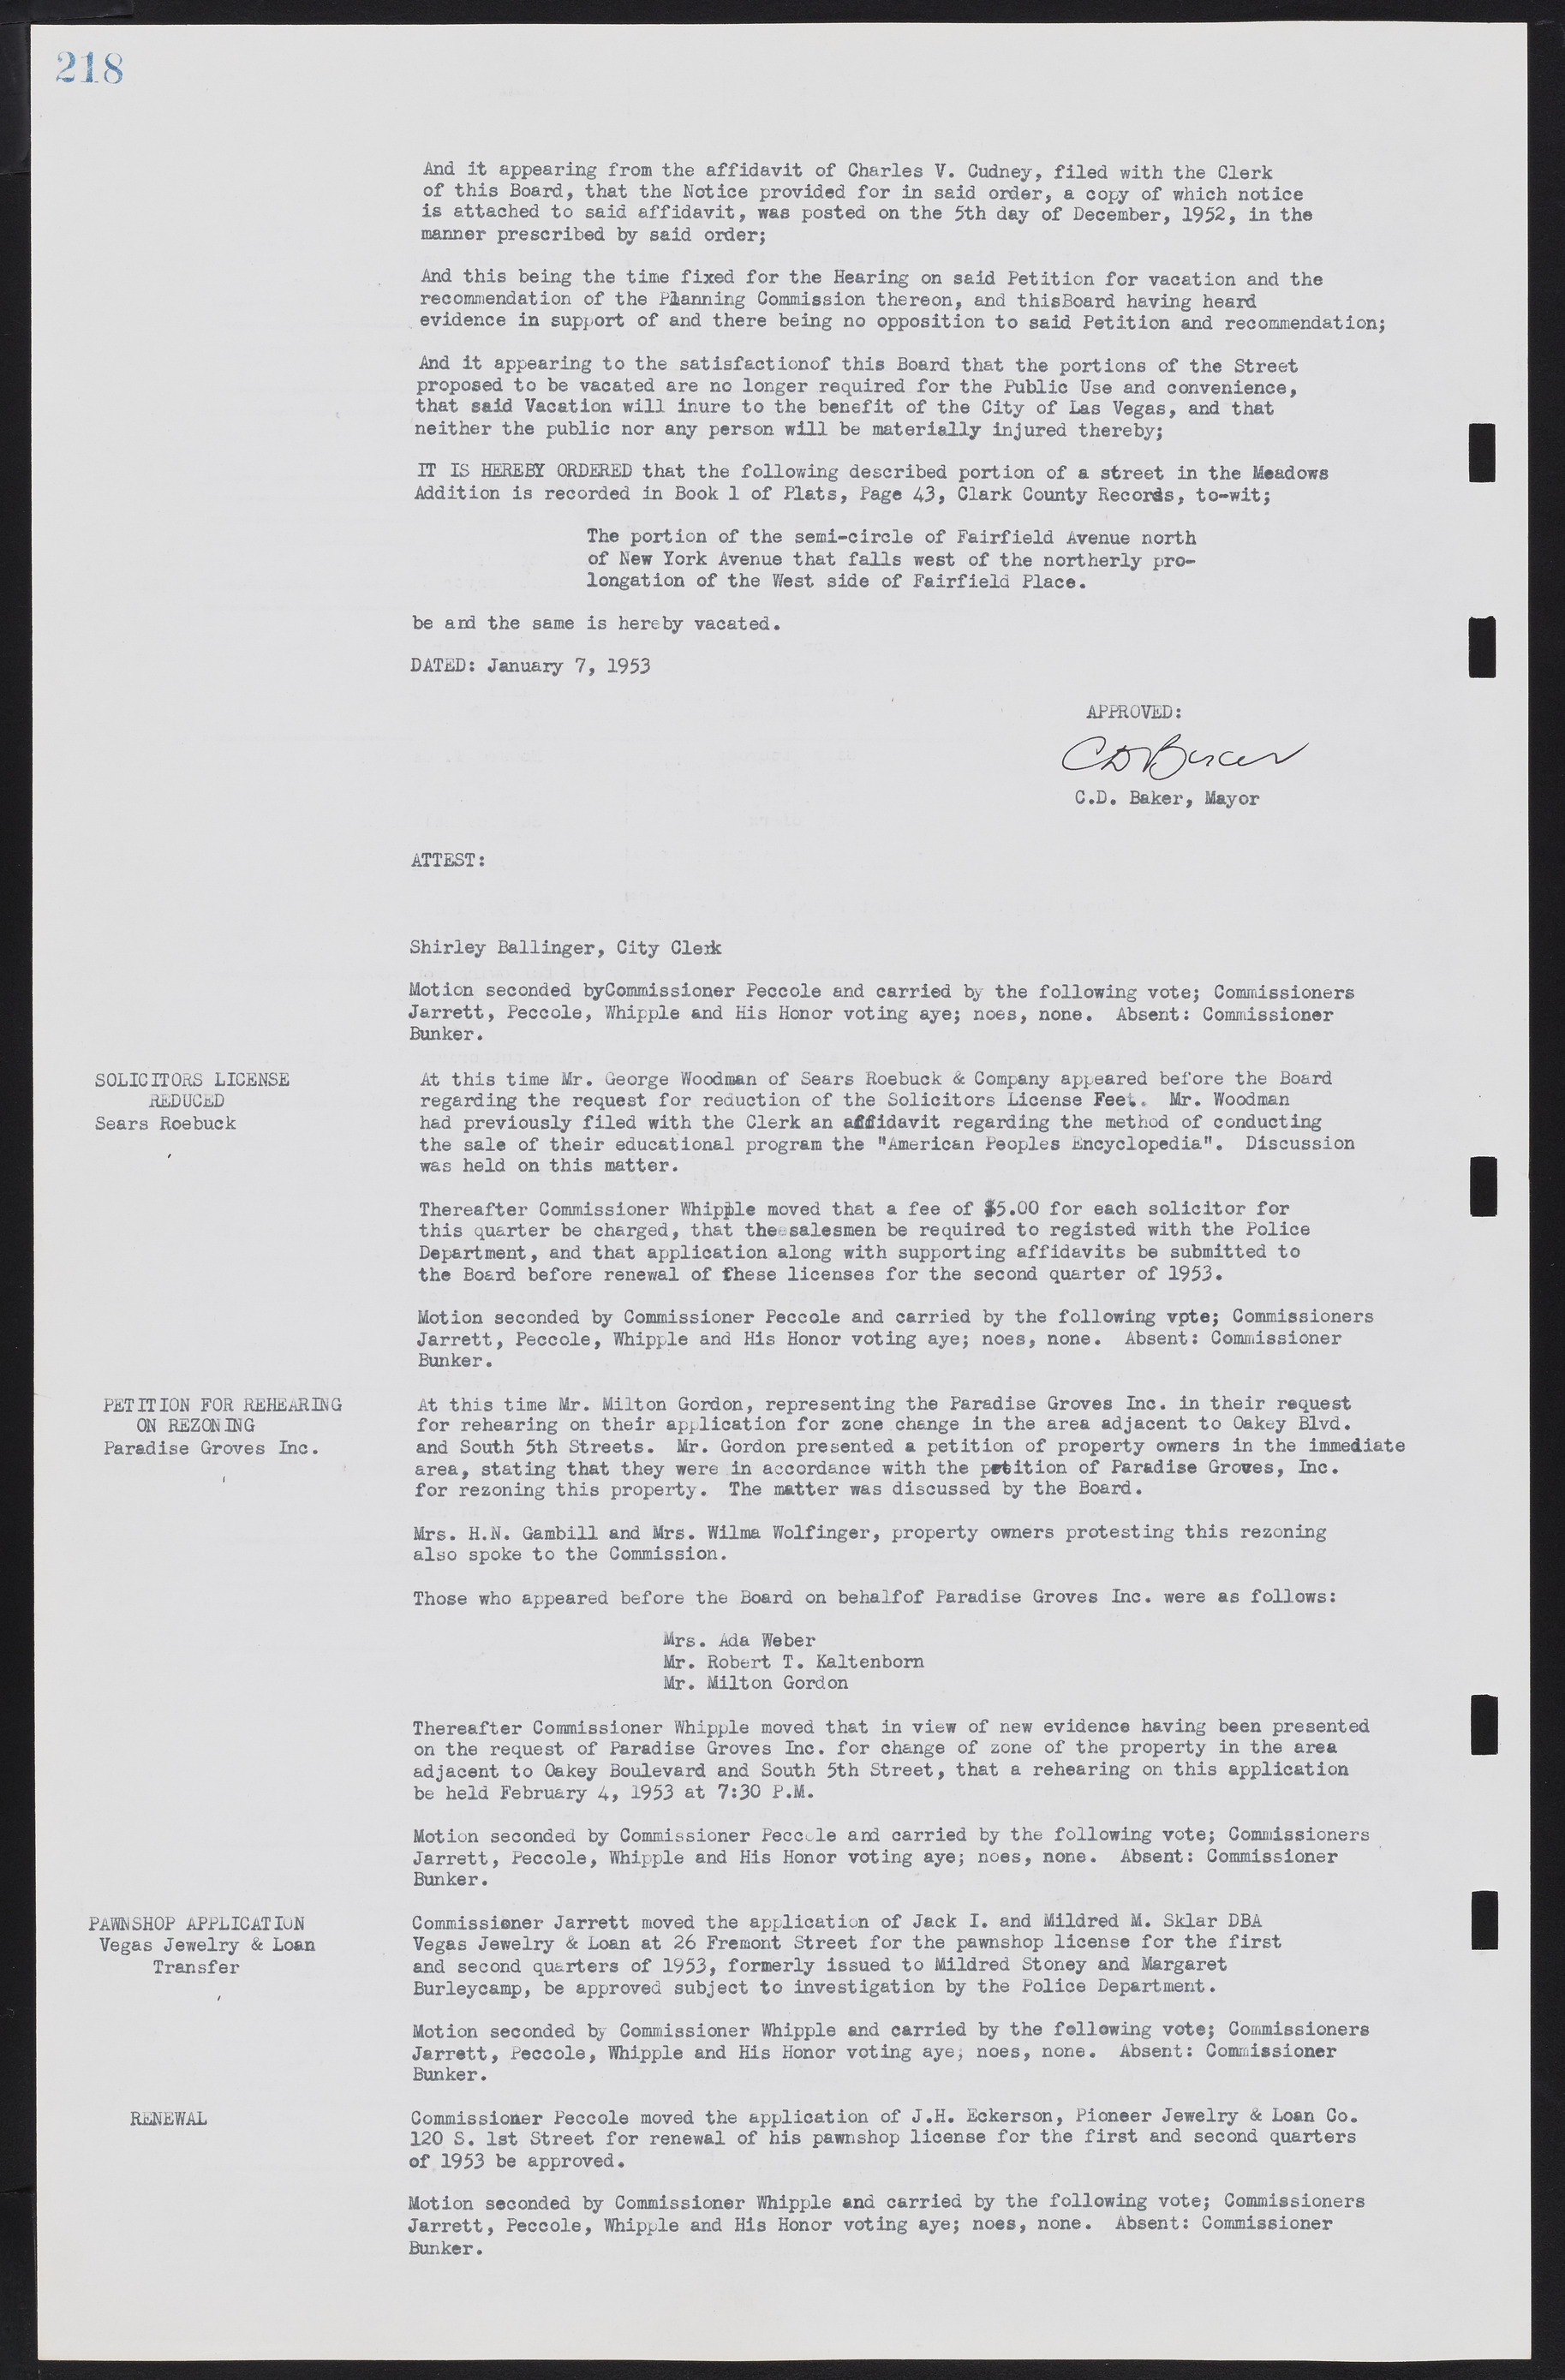 Las Vegas City Commission Minutes, May 26, 1952 to February 17, 1954, lvc000008-234